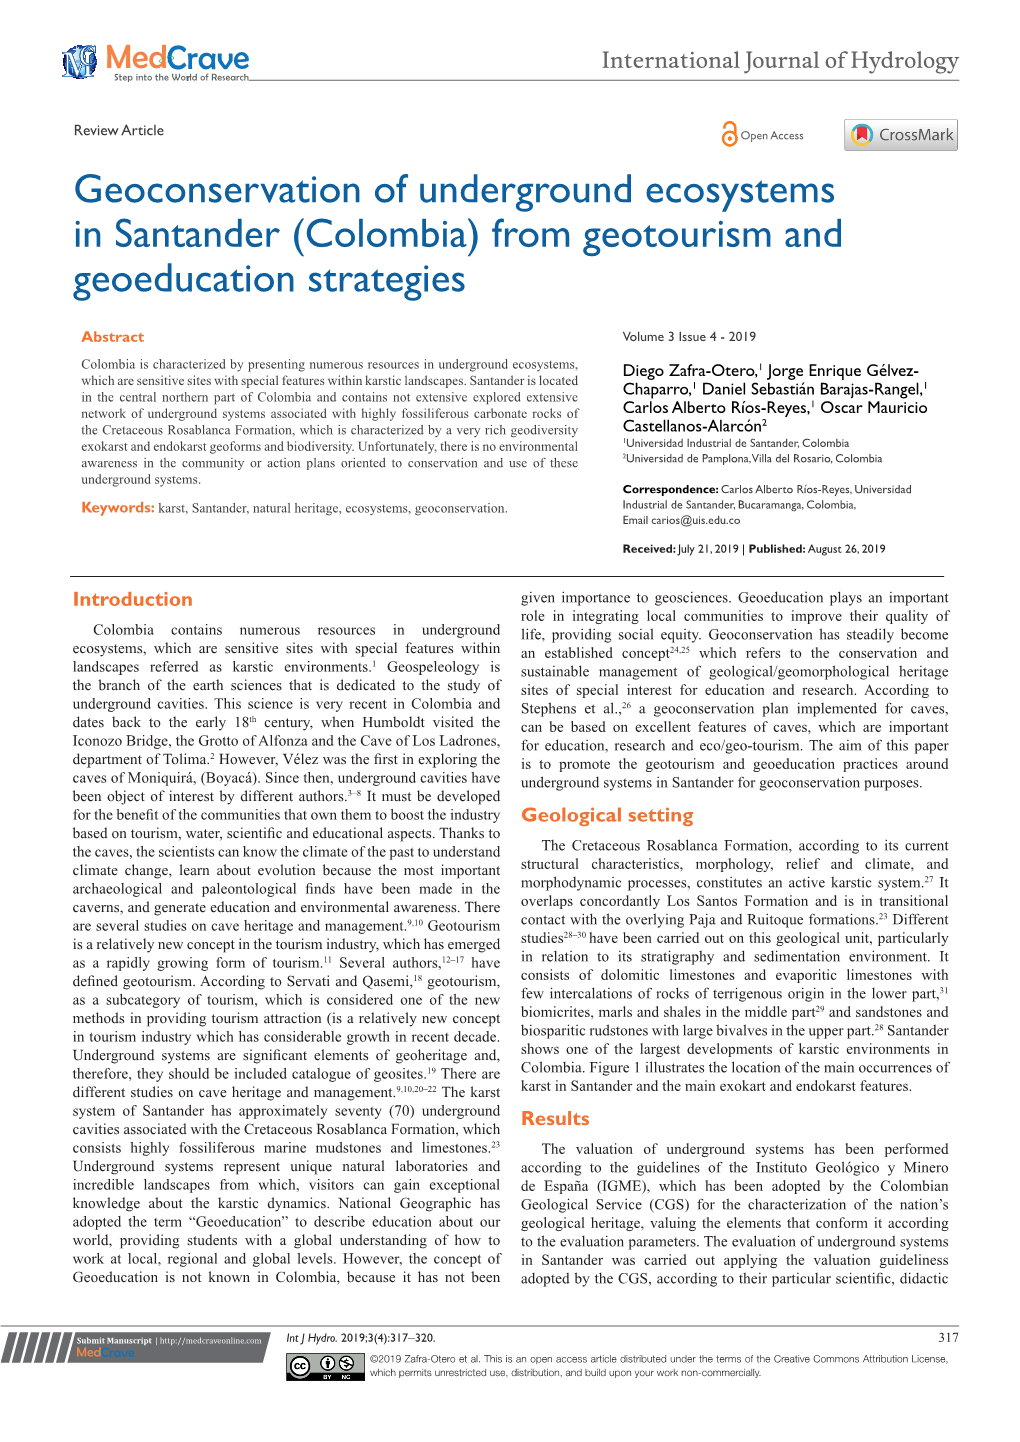 Geoconservation of Underground Ecosystems in Santander (Colombia) from Geotourism and Geoeducation Strategies